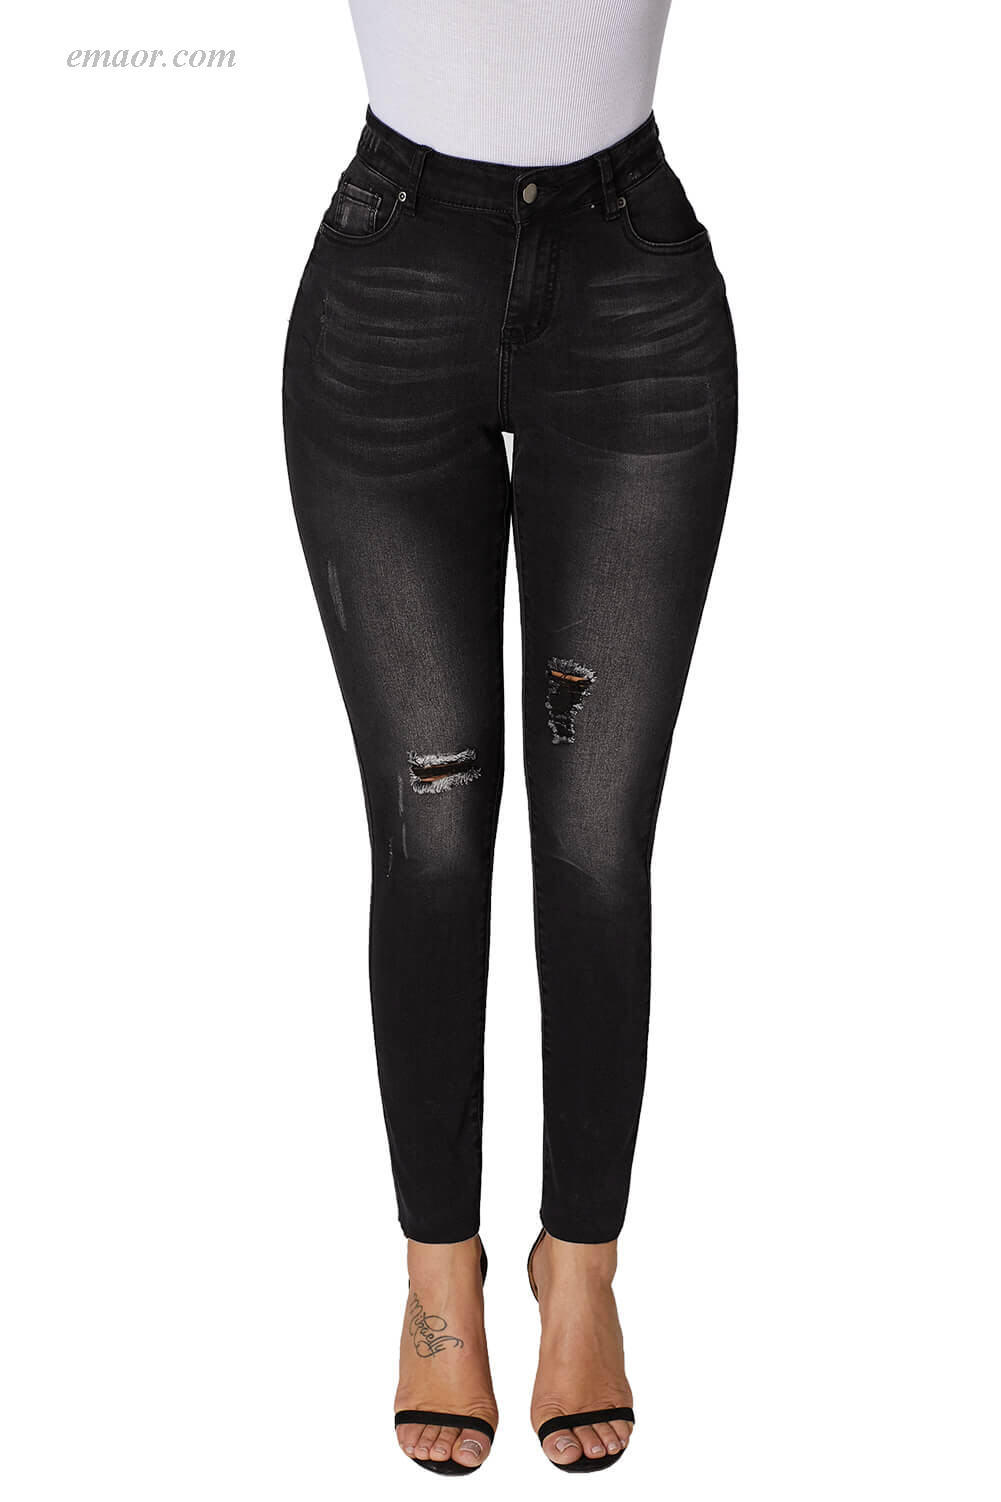 Fashion Skinny Bootcut Women's Ripped Skinny Stretch Jeans Best Jeans ...